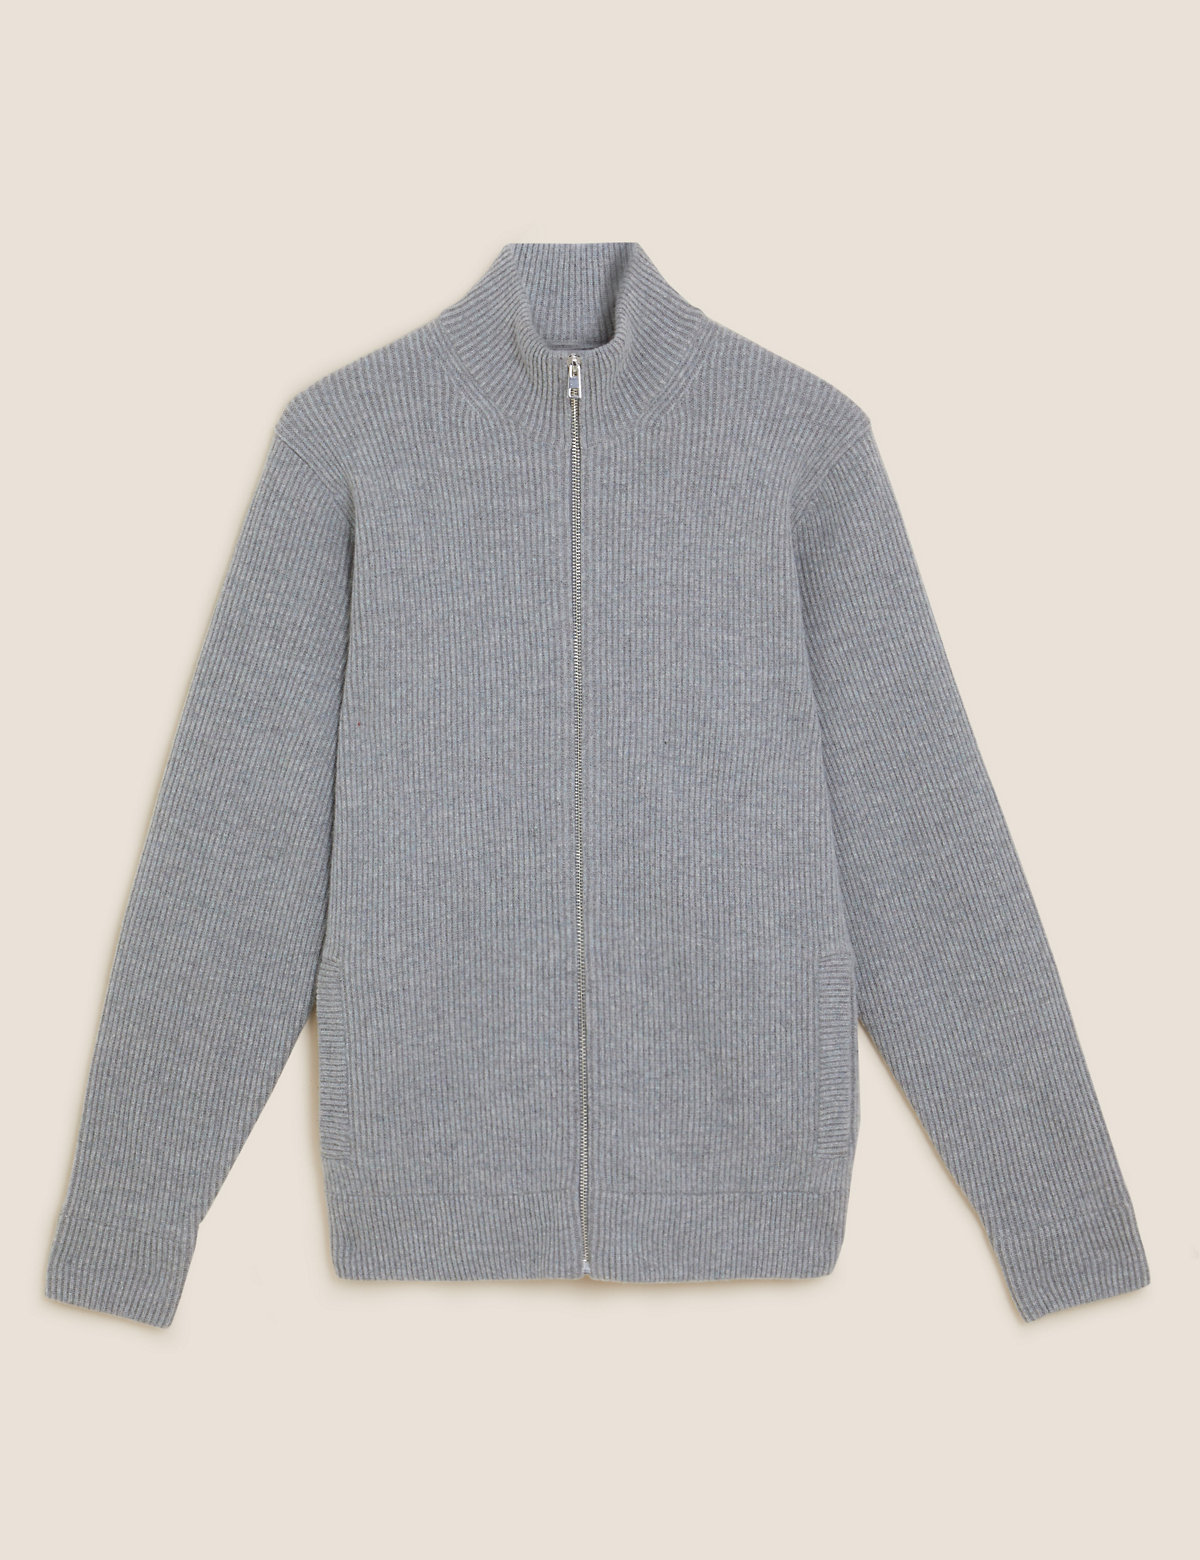 Wool Funnel Neck Knitted Jacket